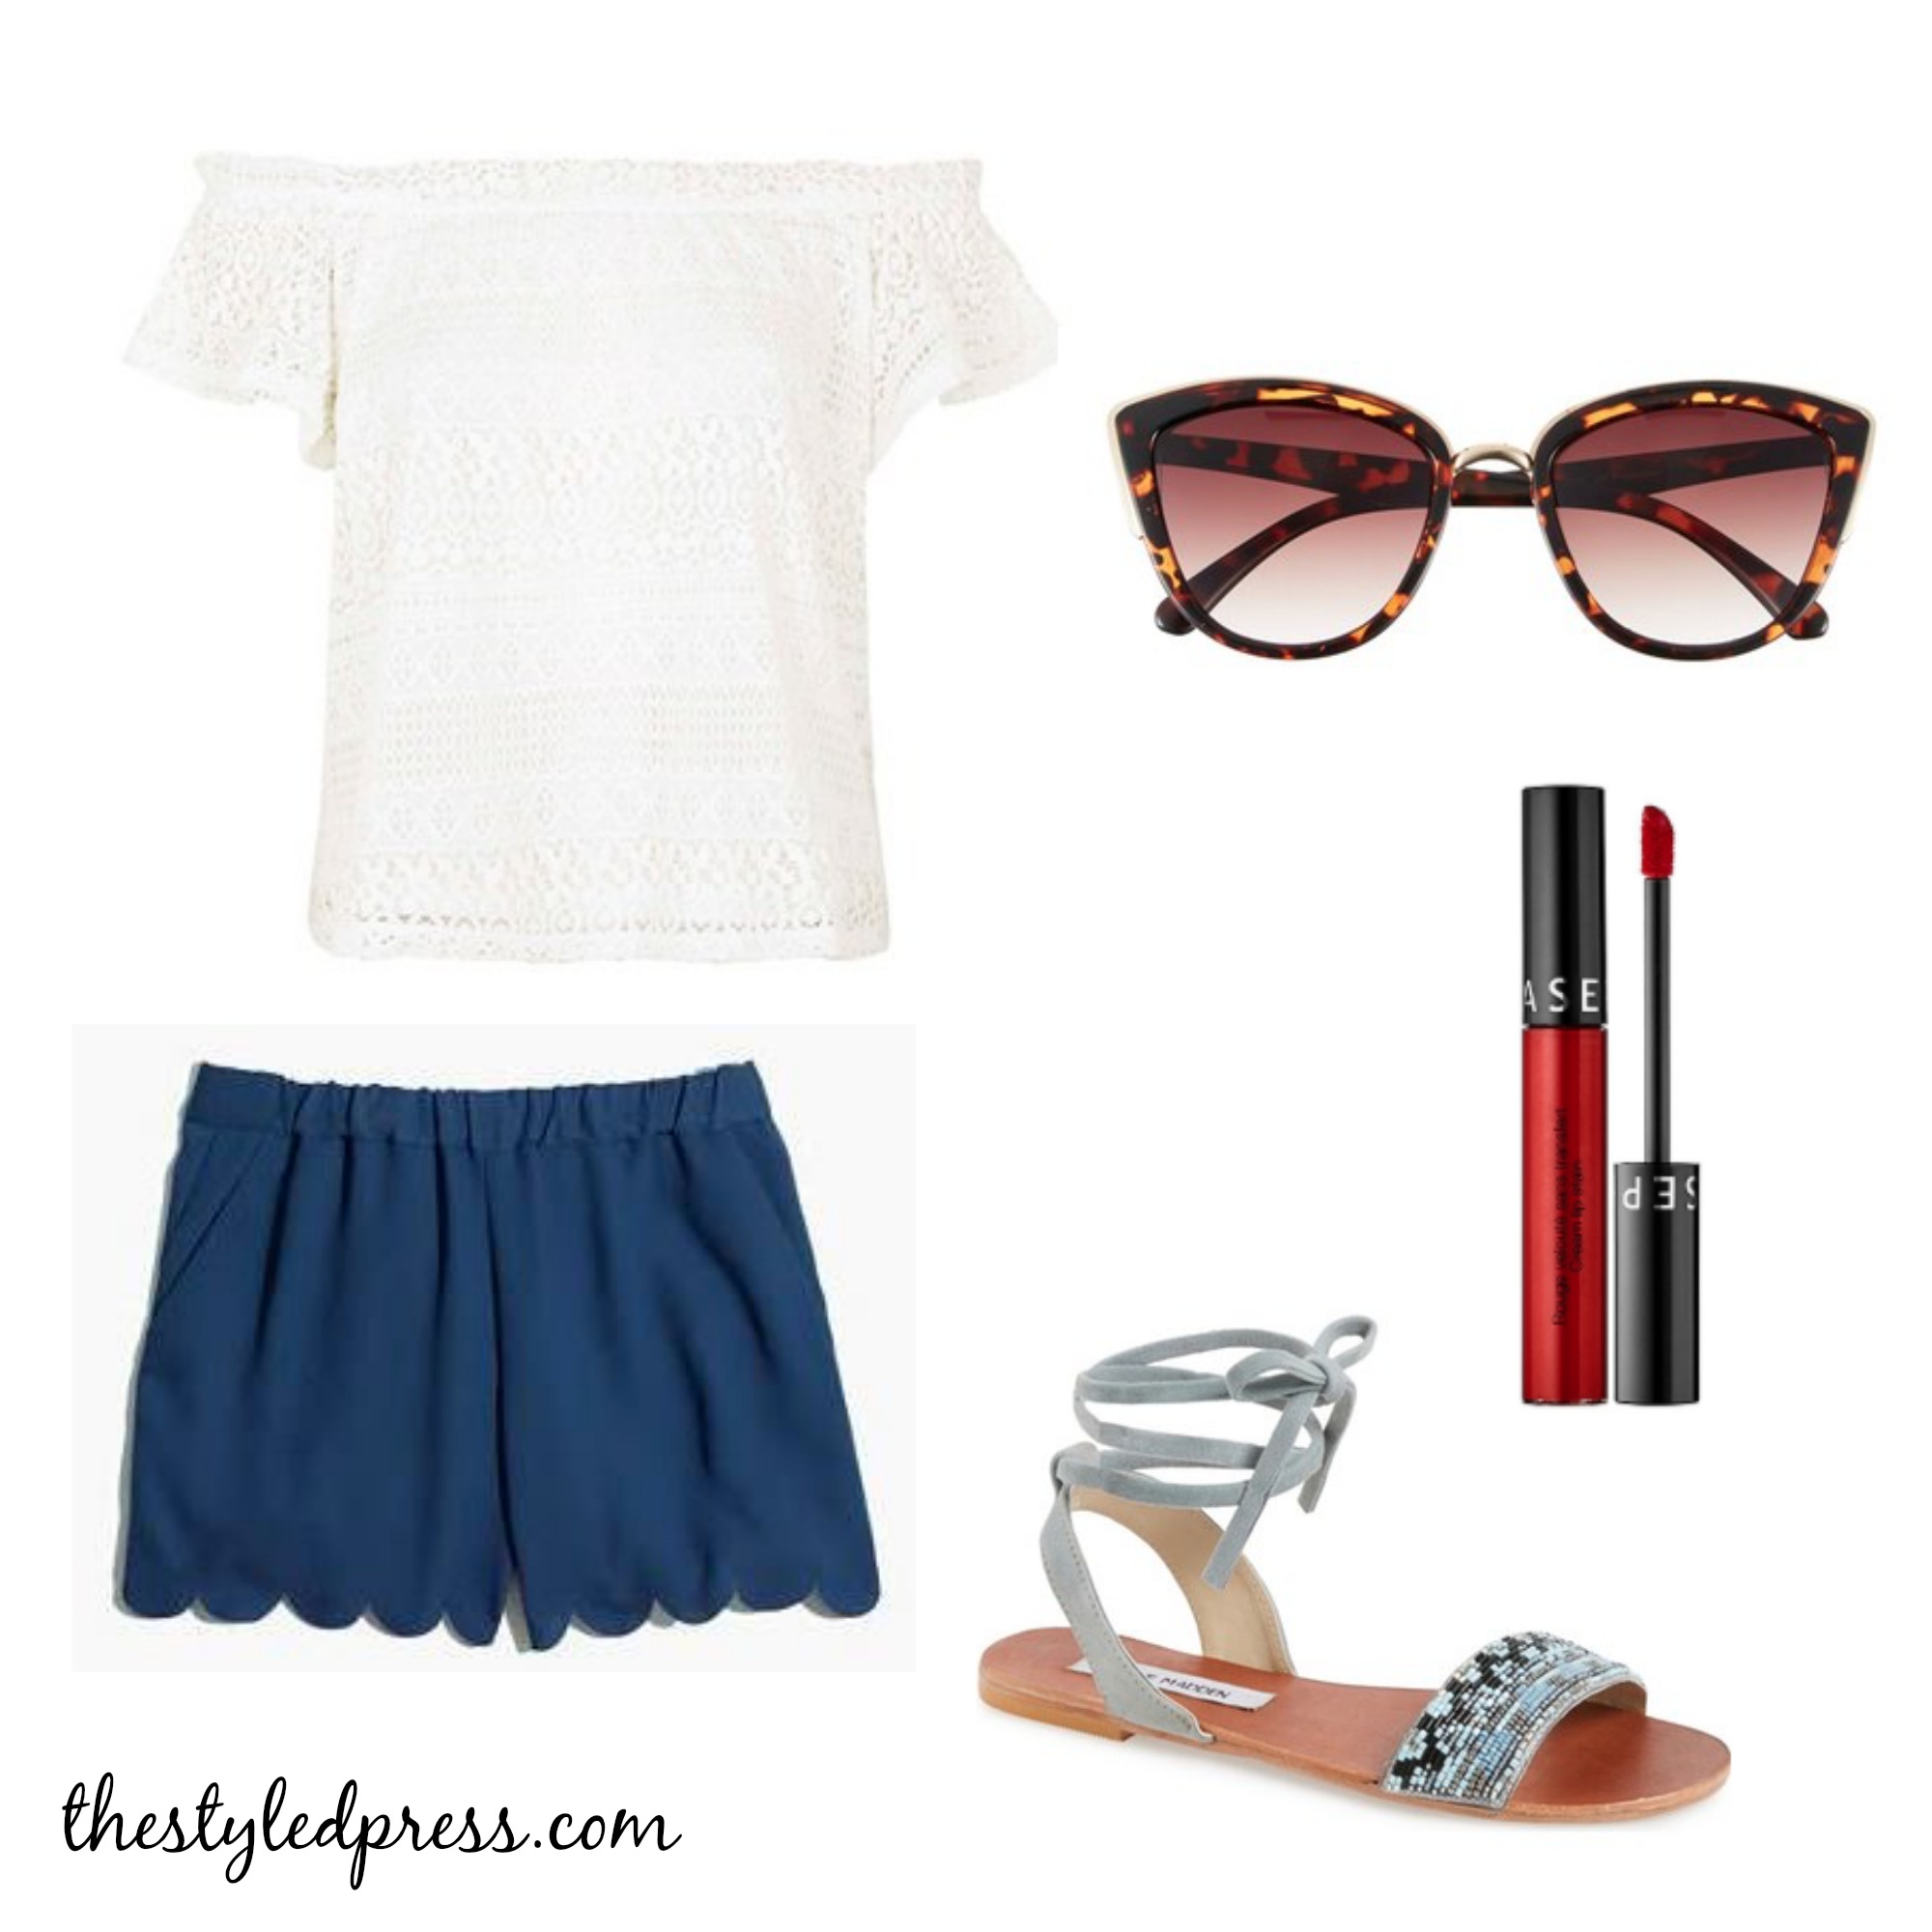 4th-of-July-Outfit-Over-the-Shoulder-Top